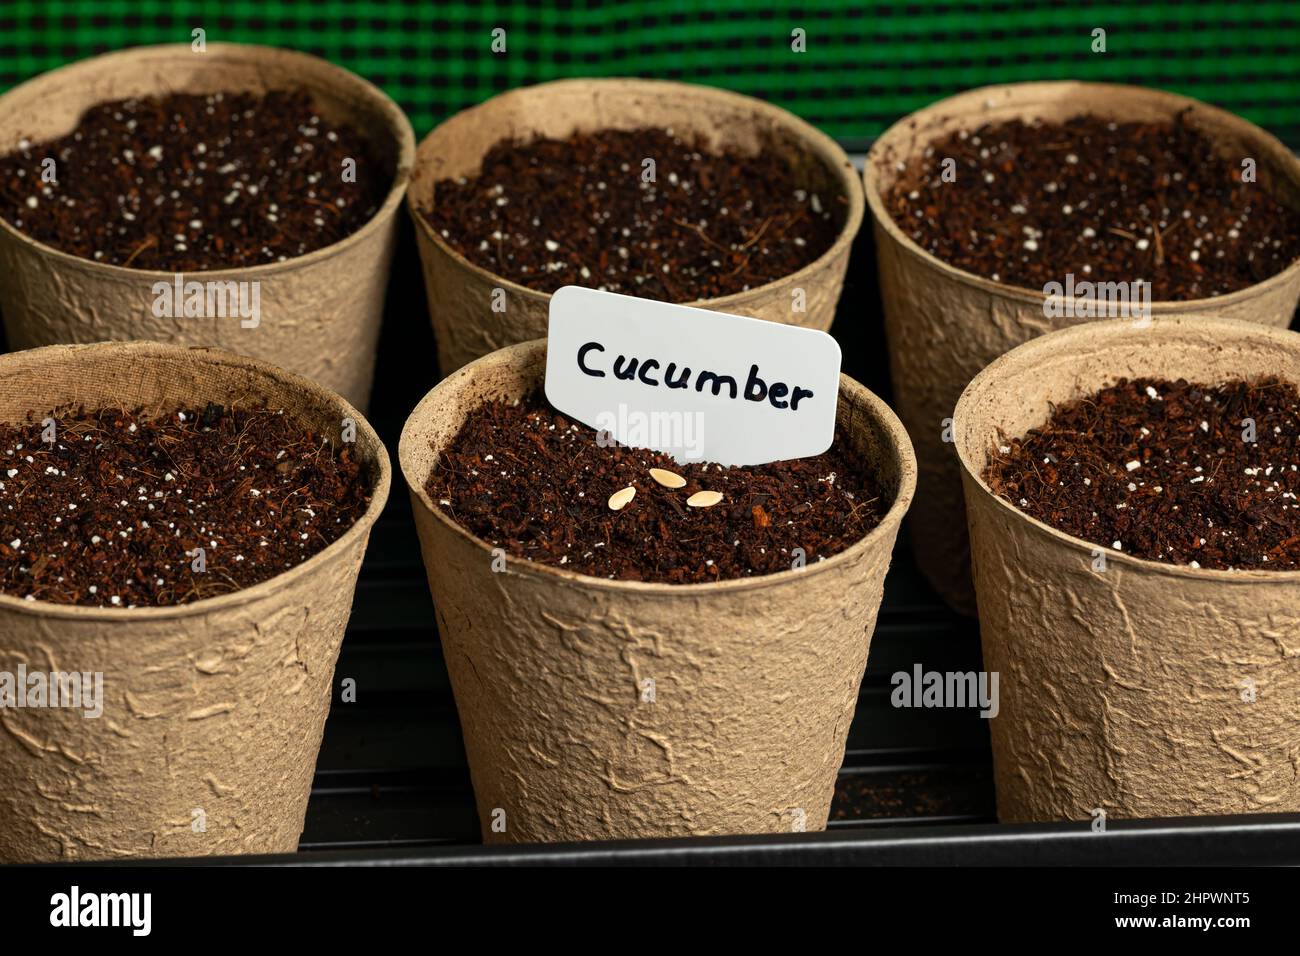 Cucumber plant seeds in indoor greenhouse. Home gardening and horticulture concept. Stock Photo